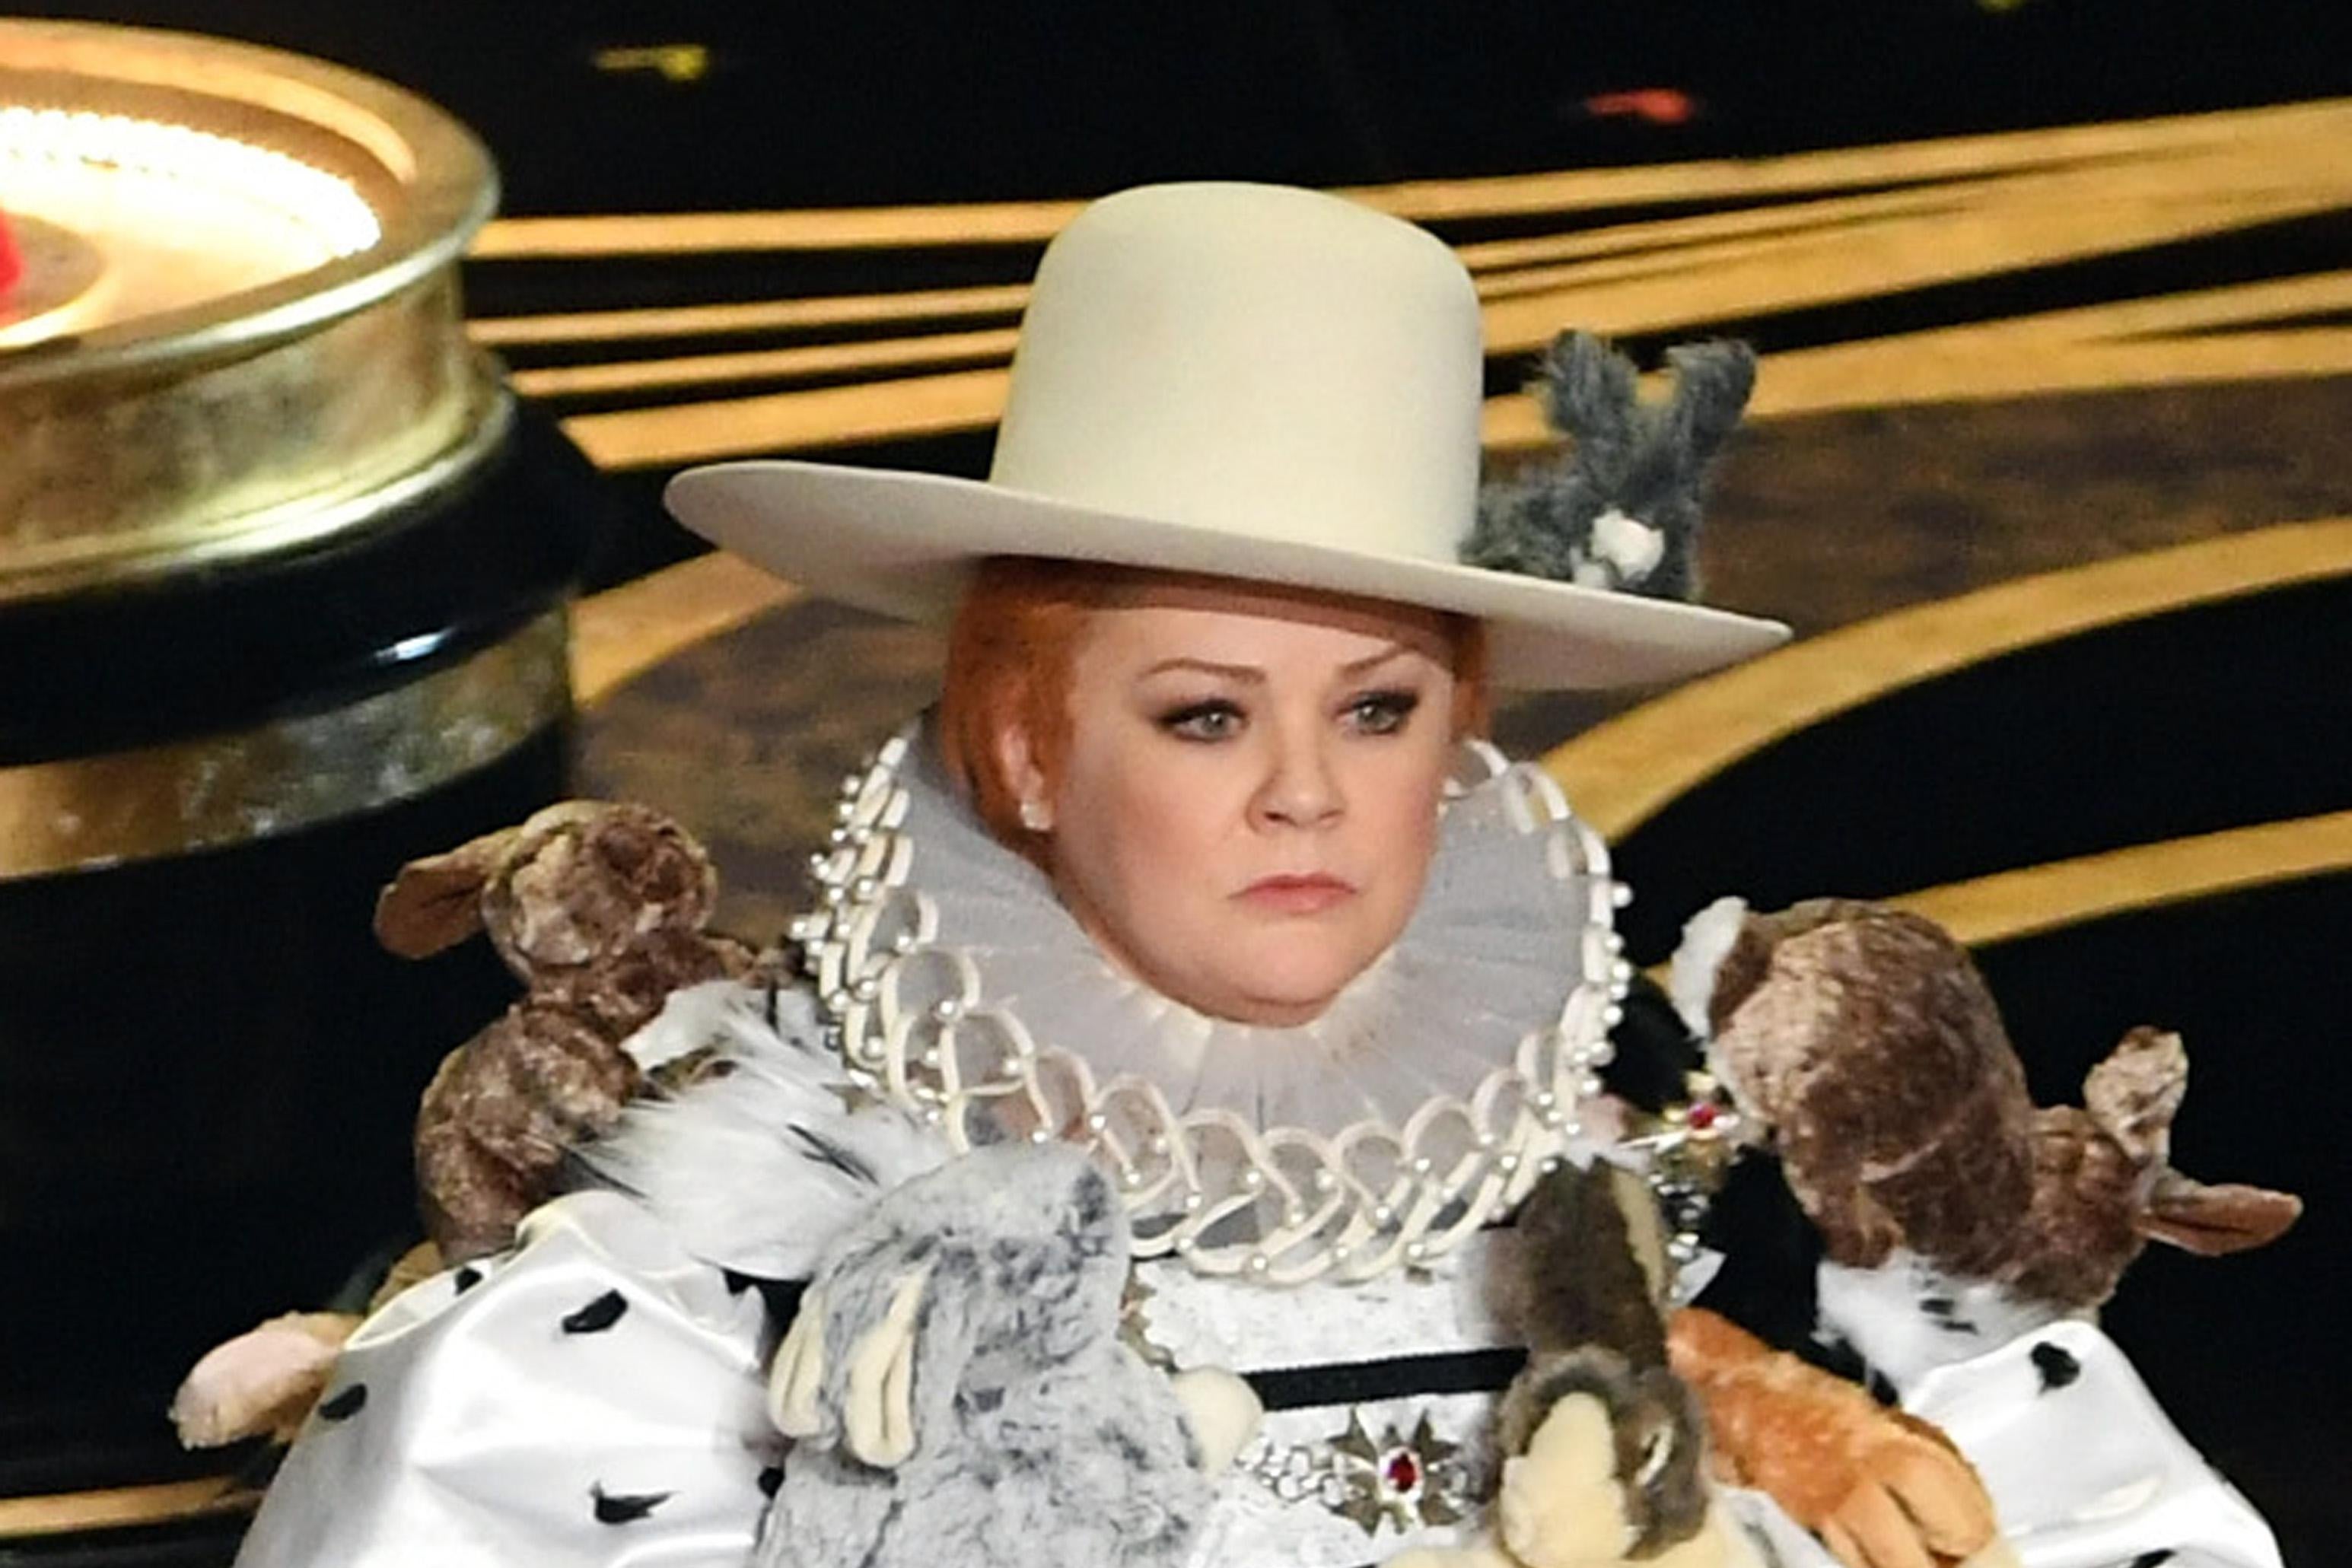 A close-up of Melissa McCarthy in costume. Her wide-brimmed hat has a stuffed rabbit on it.